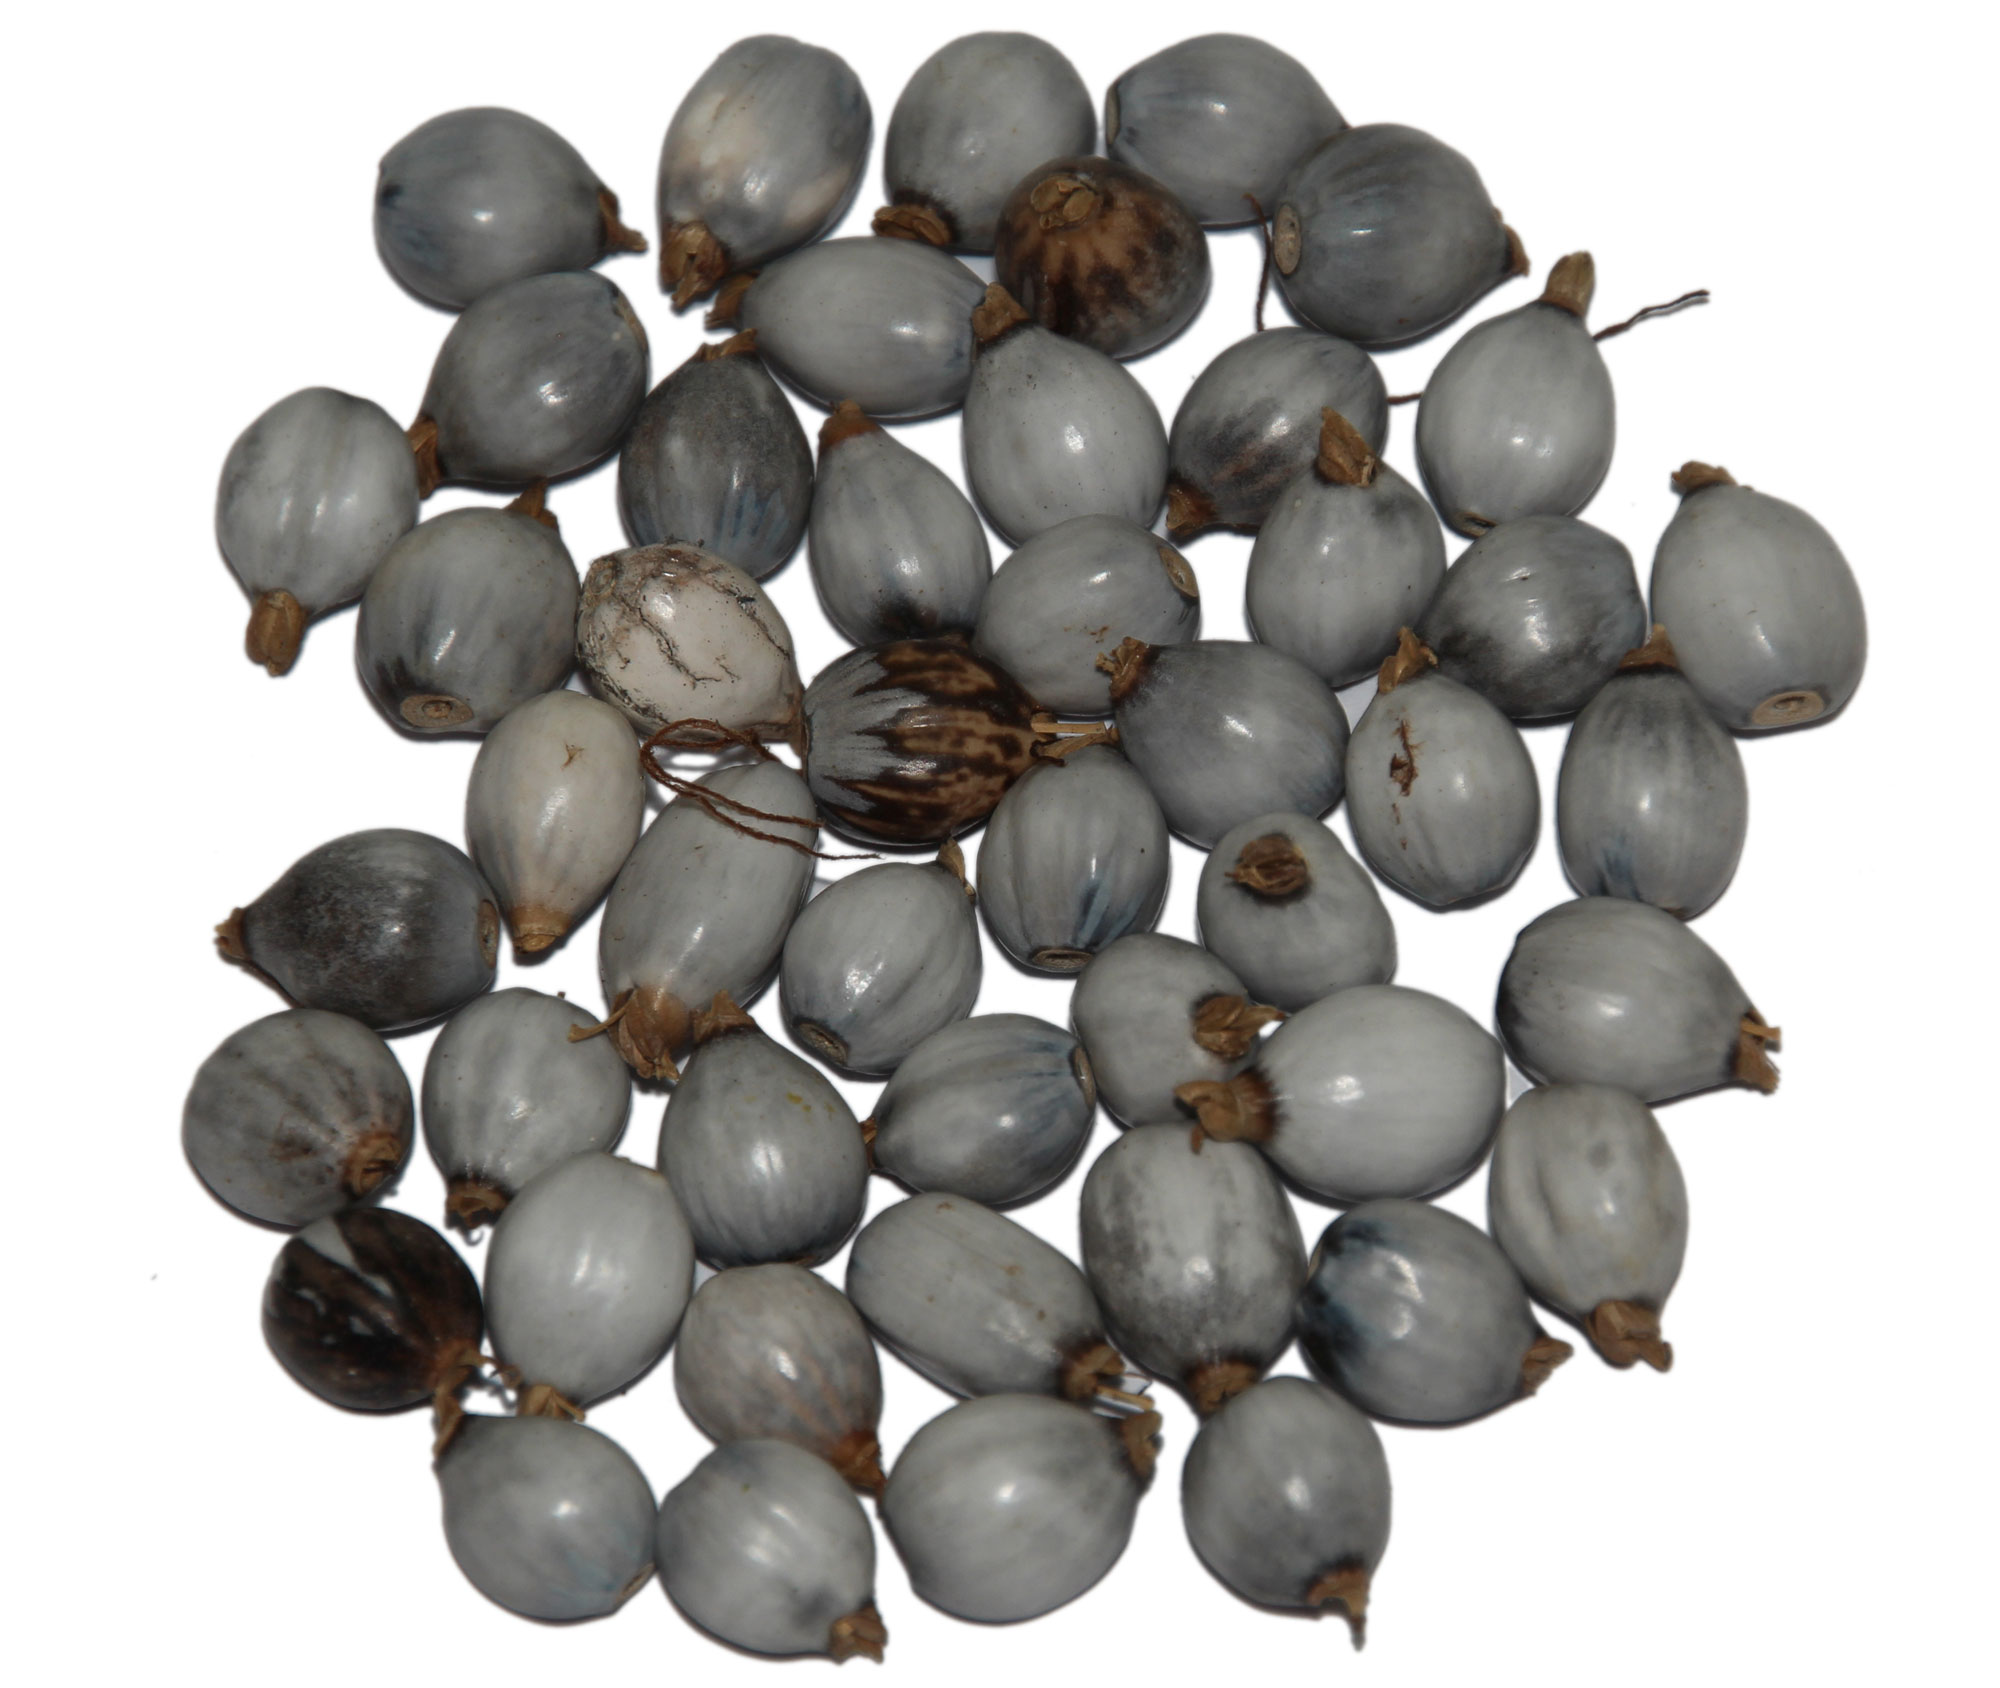 Photograph of adlay grains with utricles still covering them. The photograph shows a group of slightly ovoid blue-gray grains against a white background.